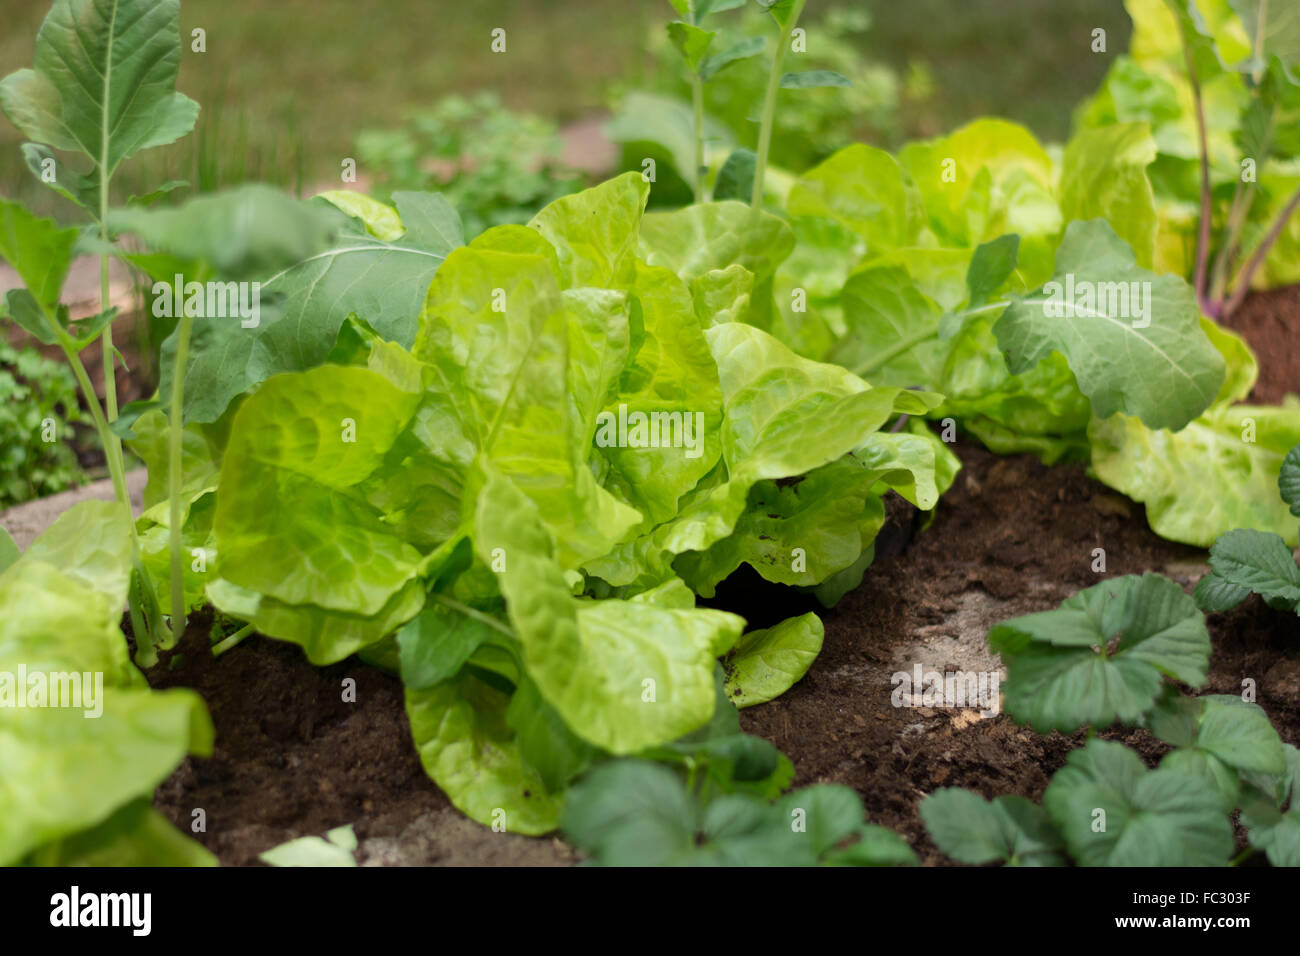 Cold frame with lettuce and kohlrabi Stock Photo